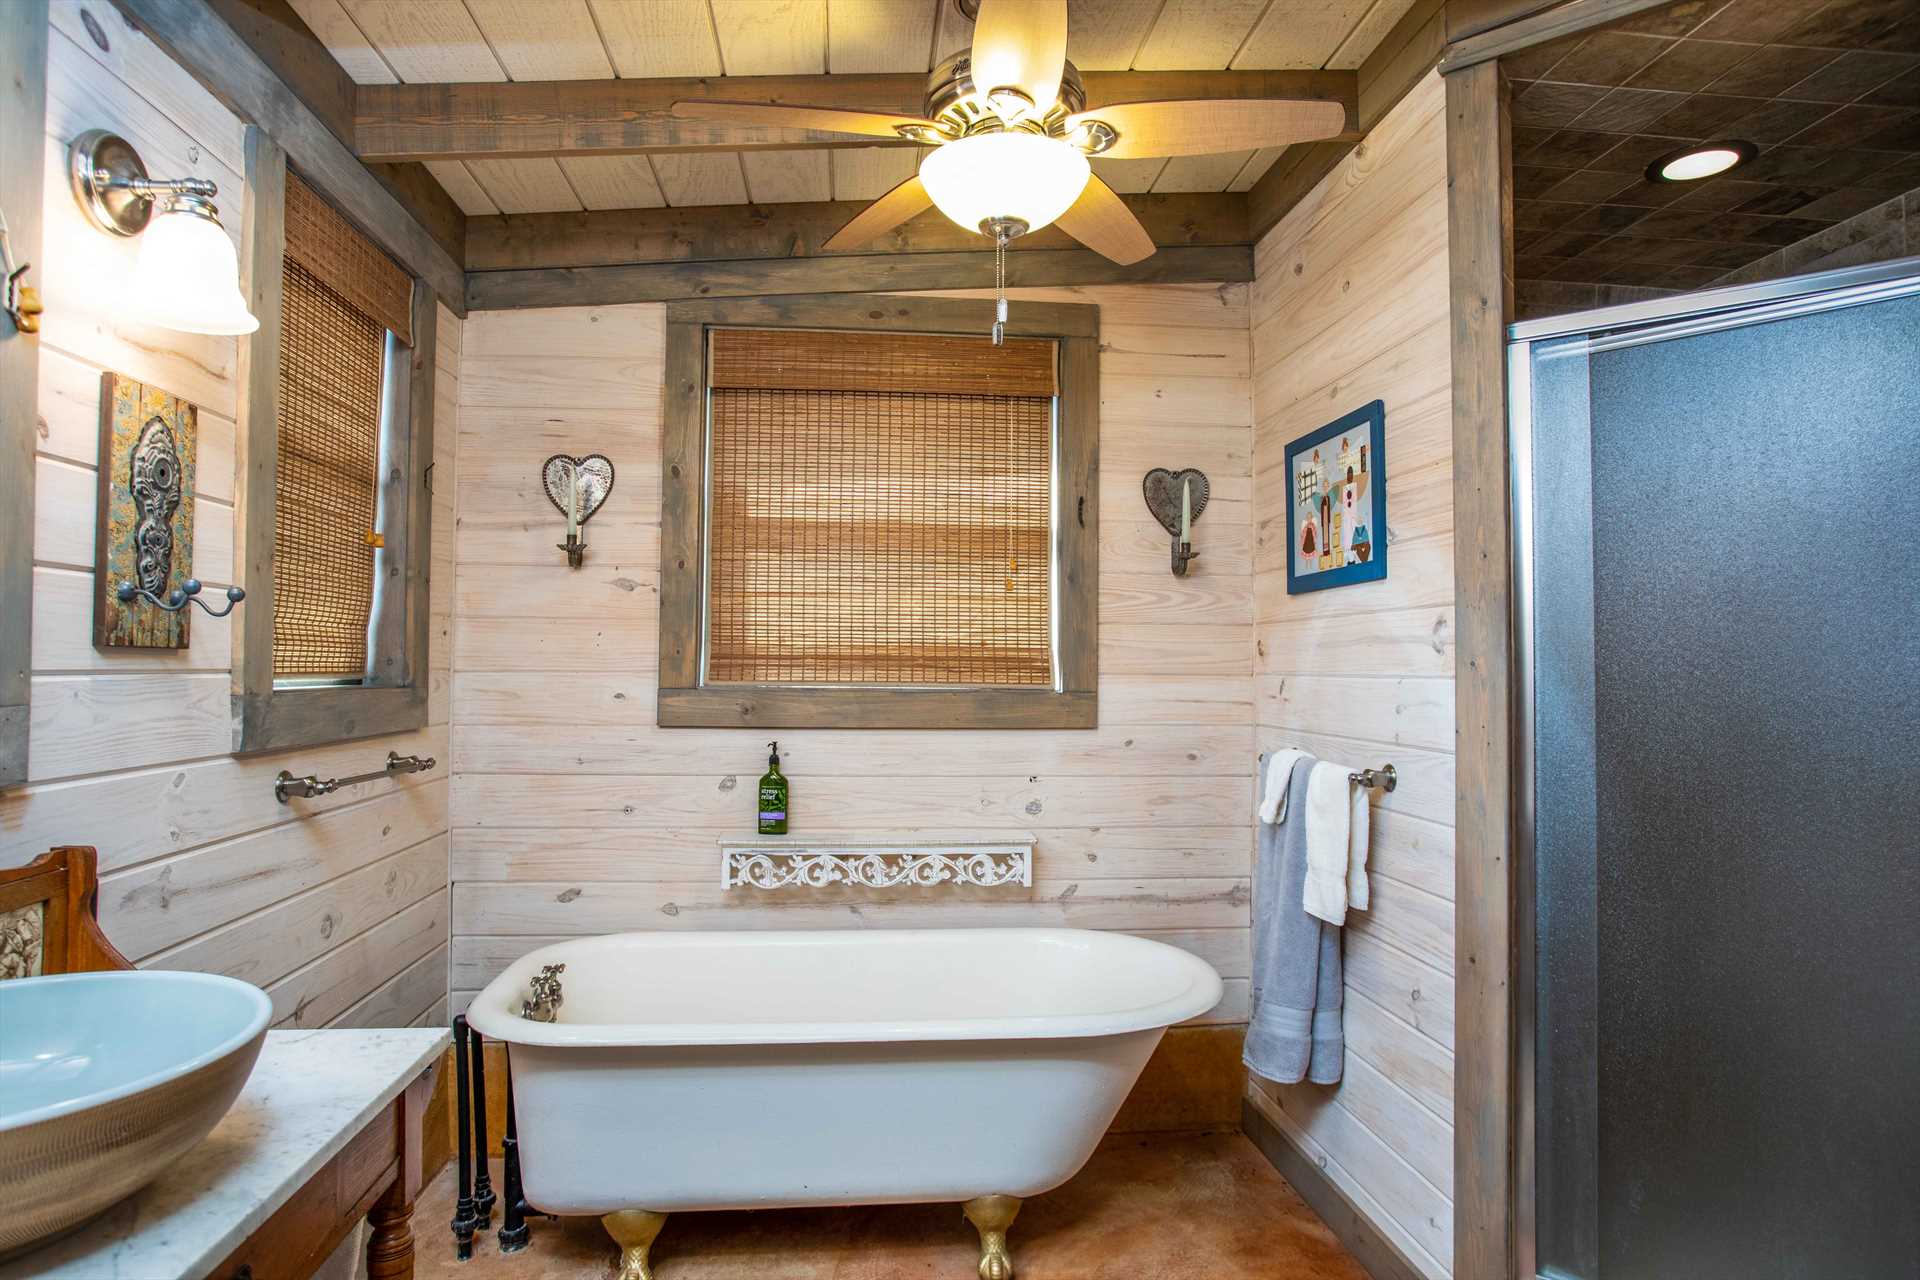                                                 Not only does the master bathroom have a roomy shower stall, but a nostalgic clawfoot tub, too, if you're in the mood for a deep and relaxing bath.